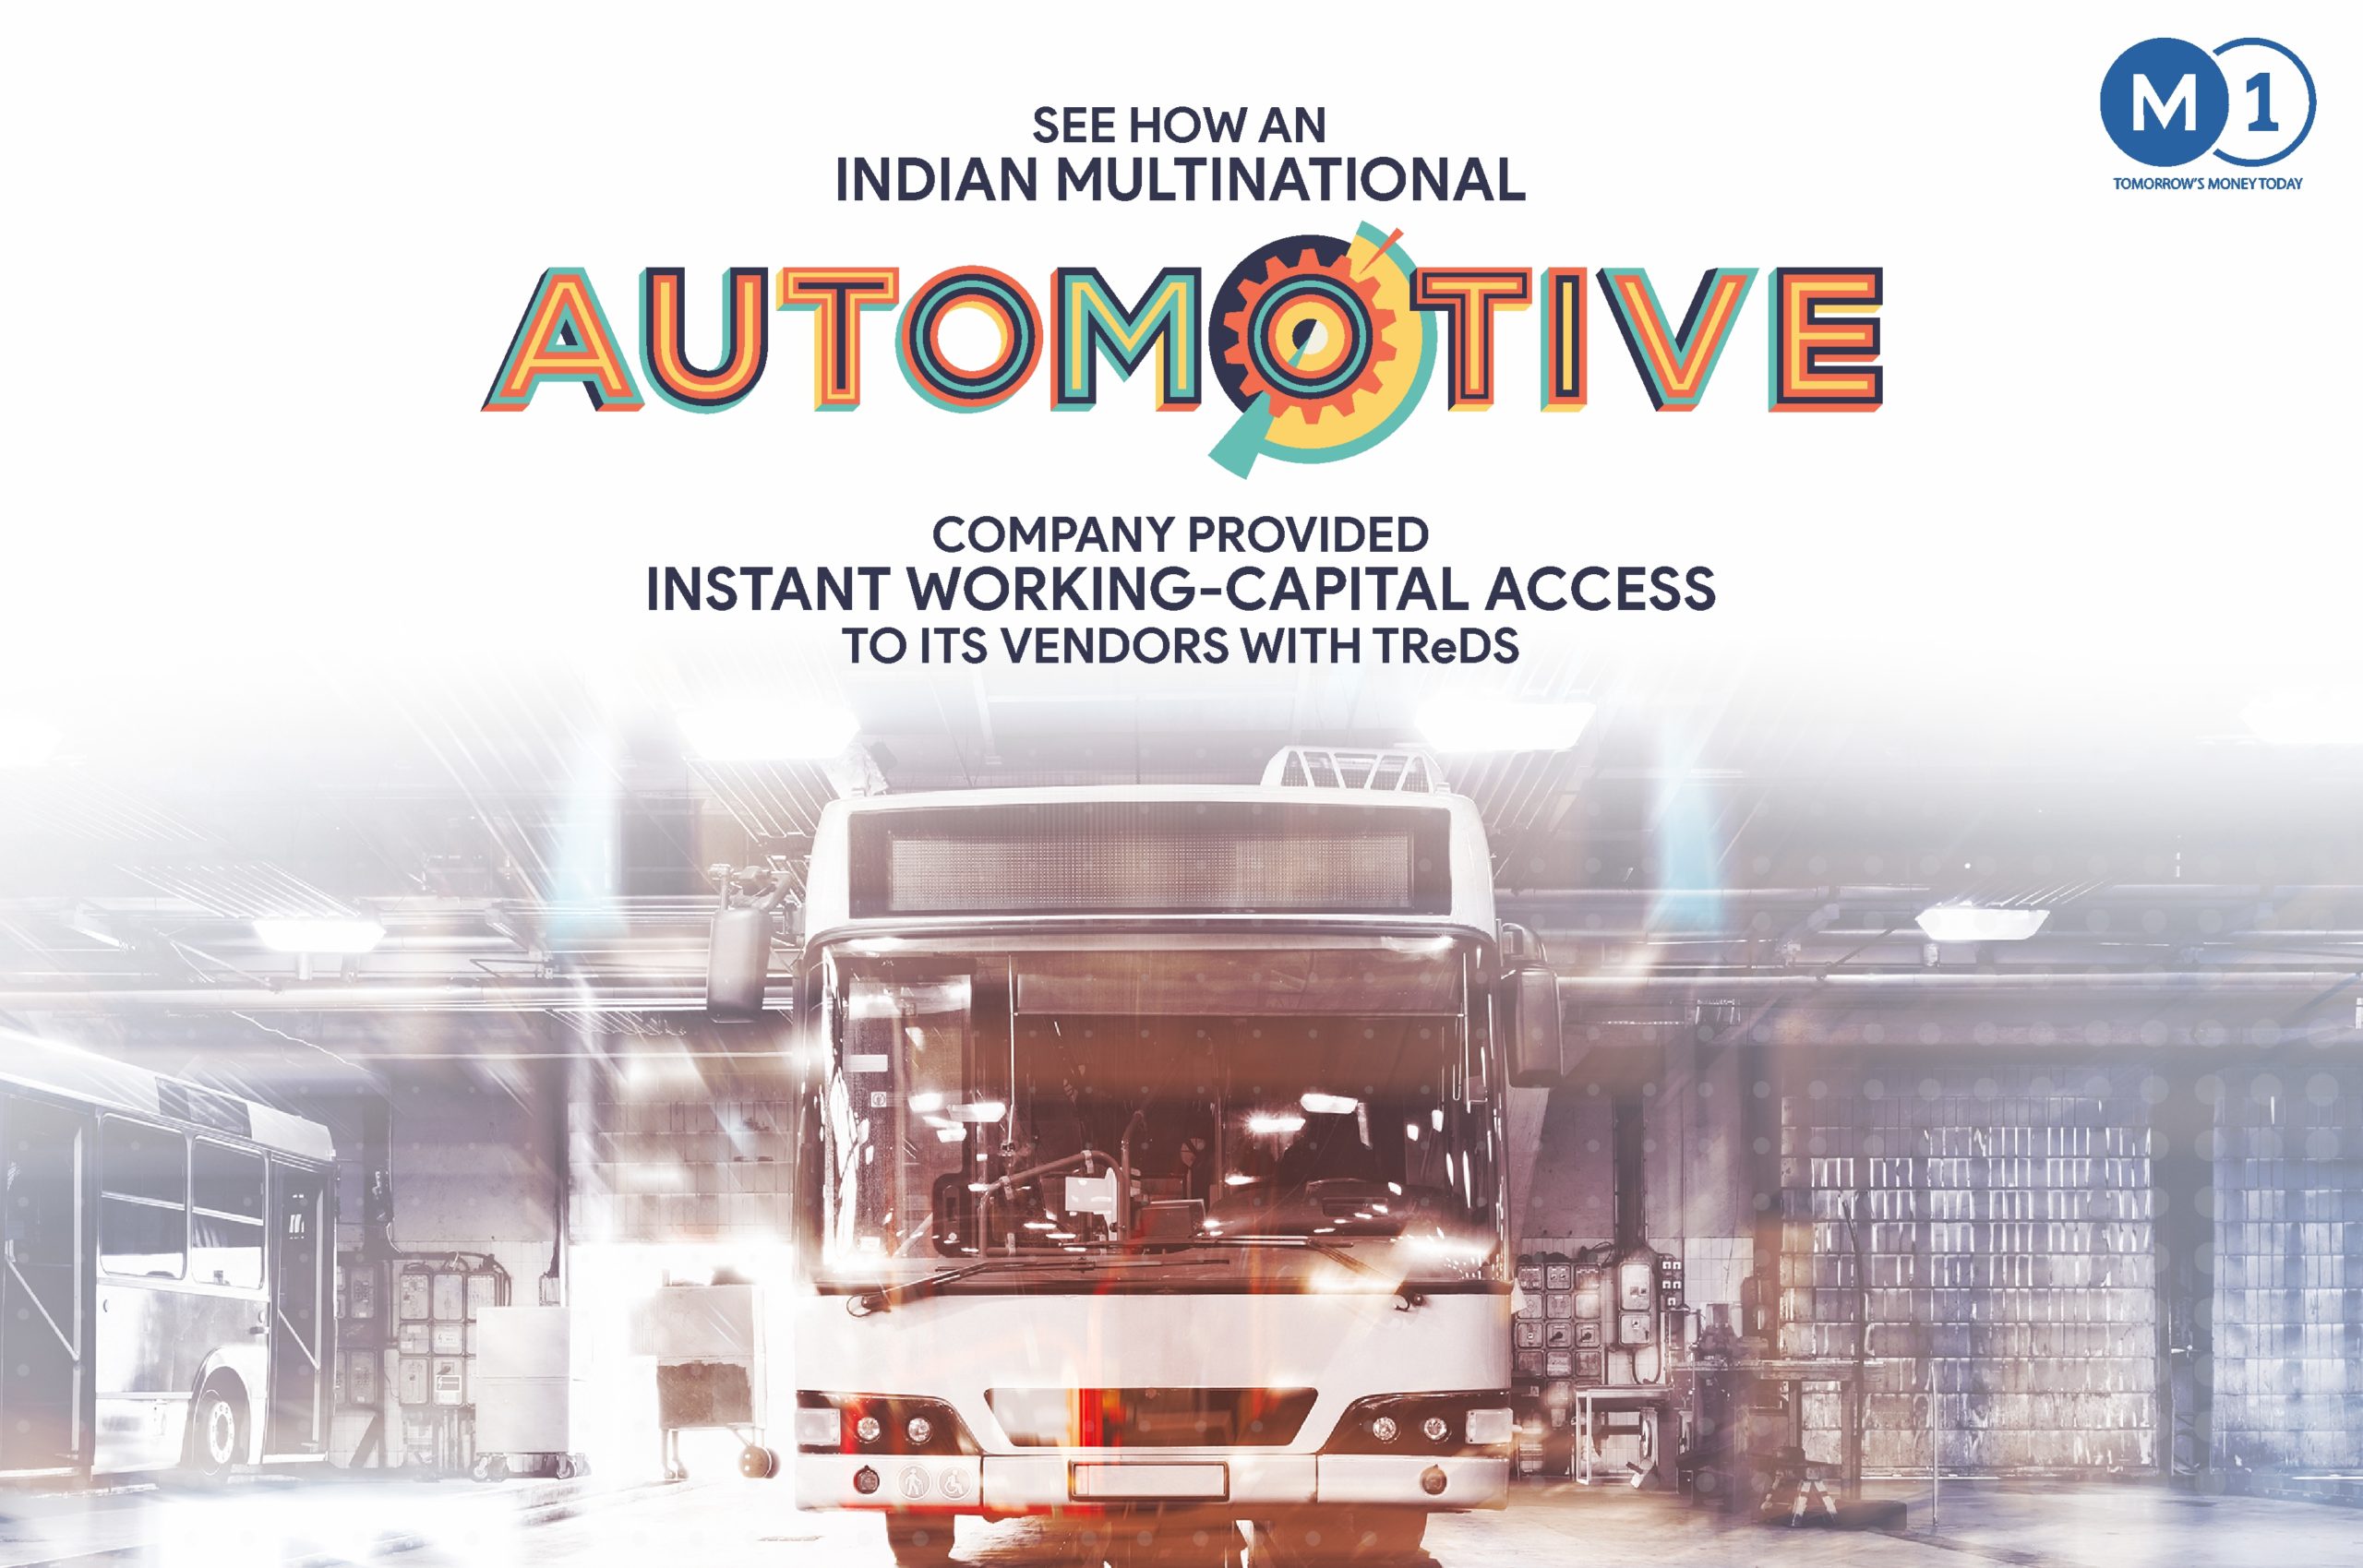 See How An Indian Multinational Automotive Company Provided Instant Working Capital Access To Its Vendors With TreDs